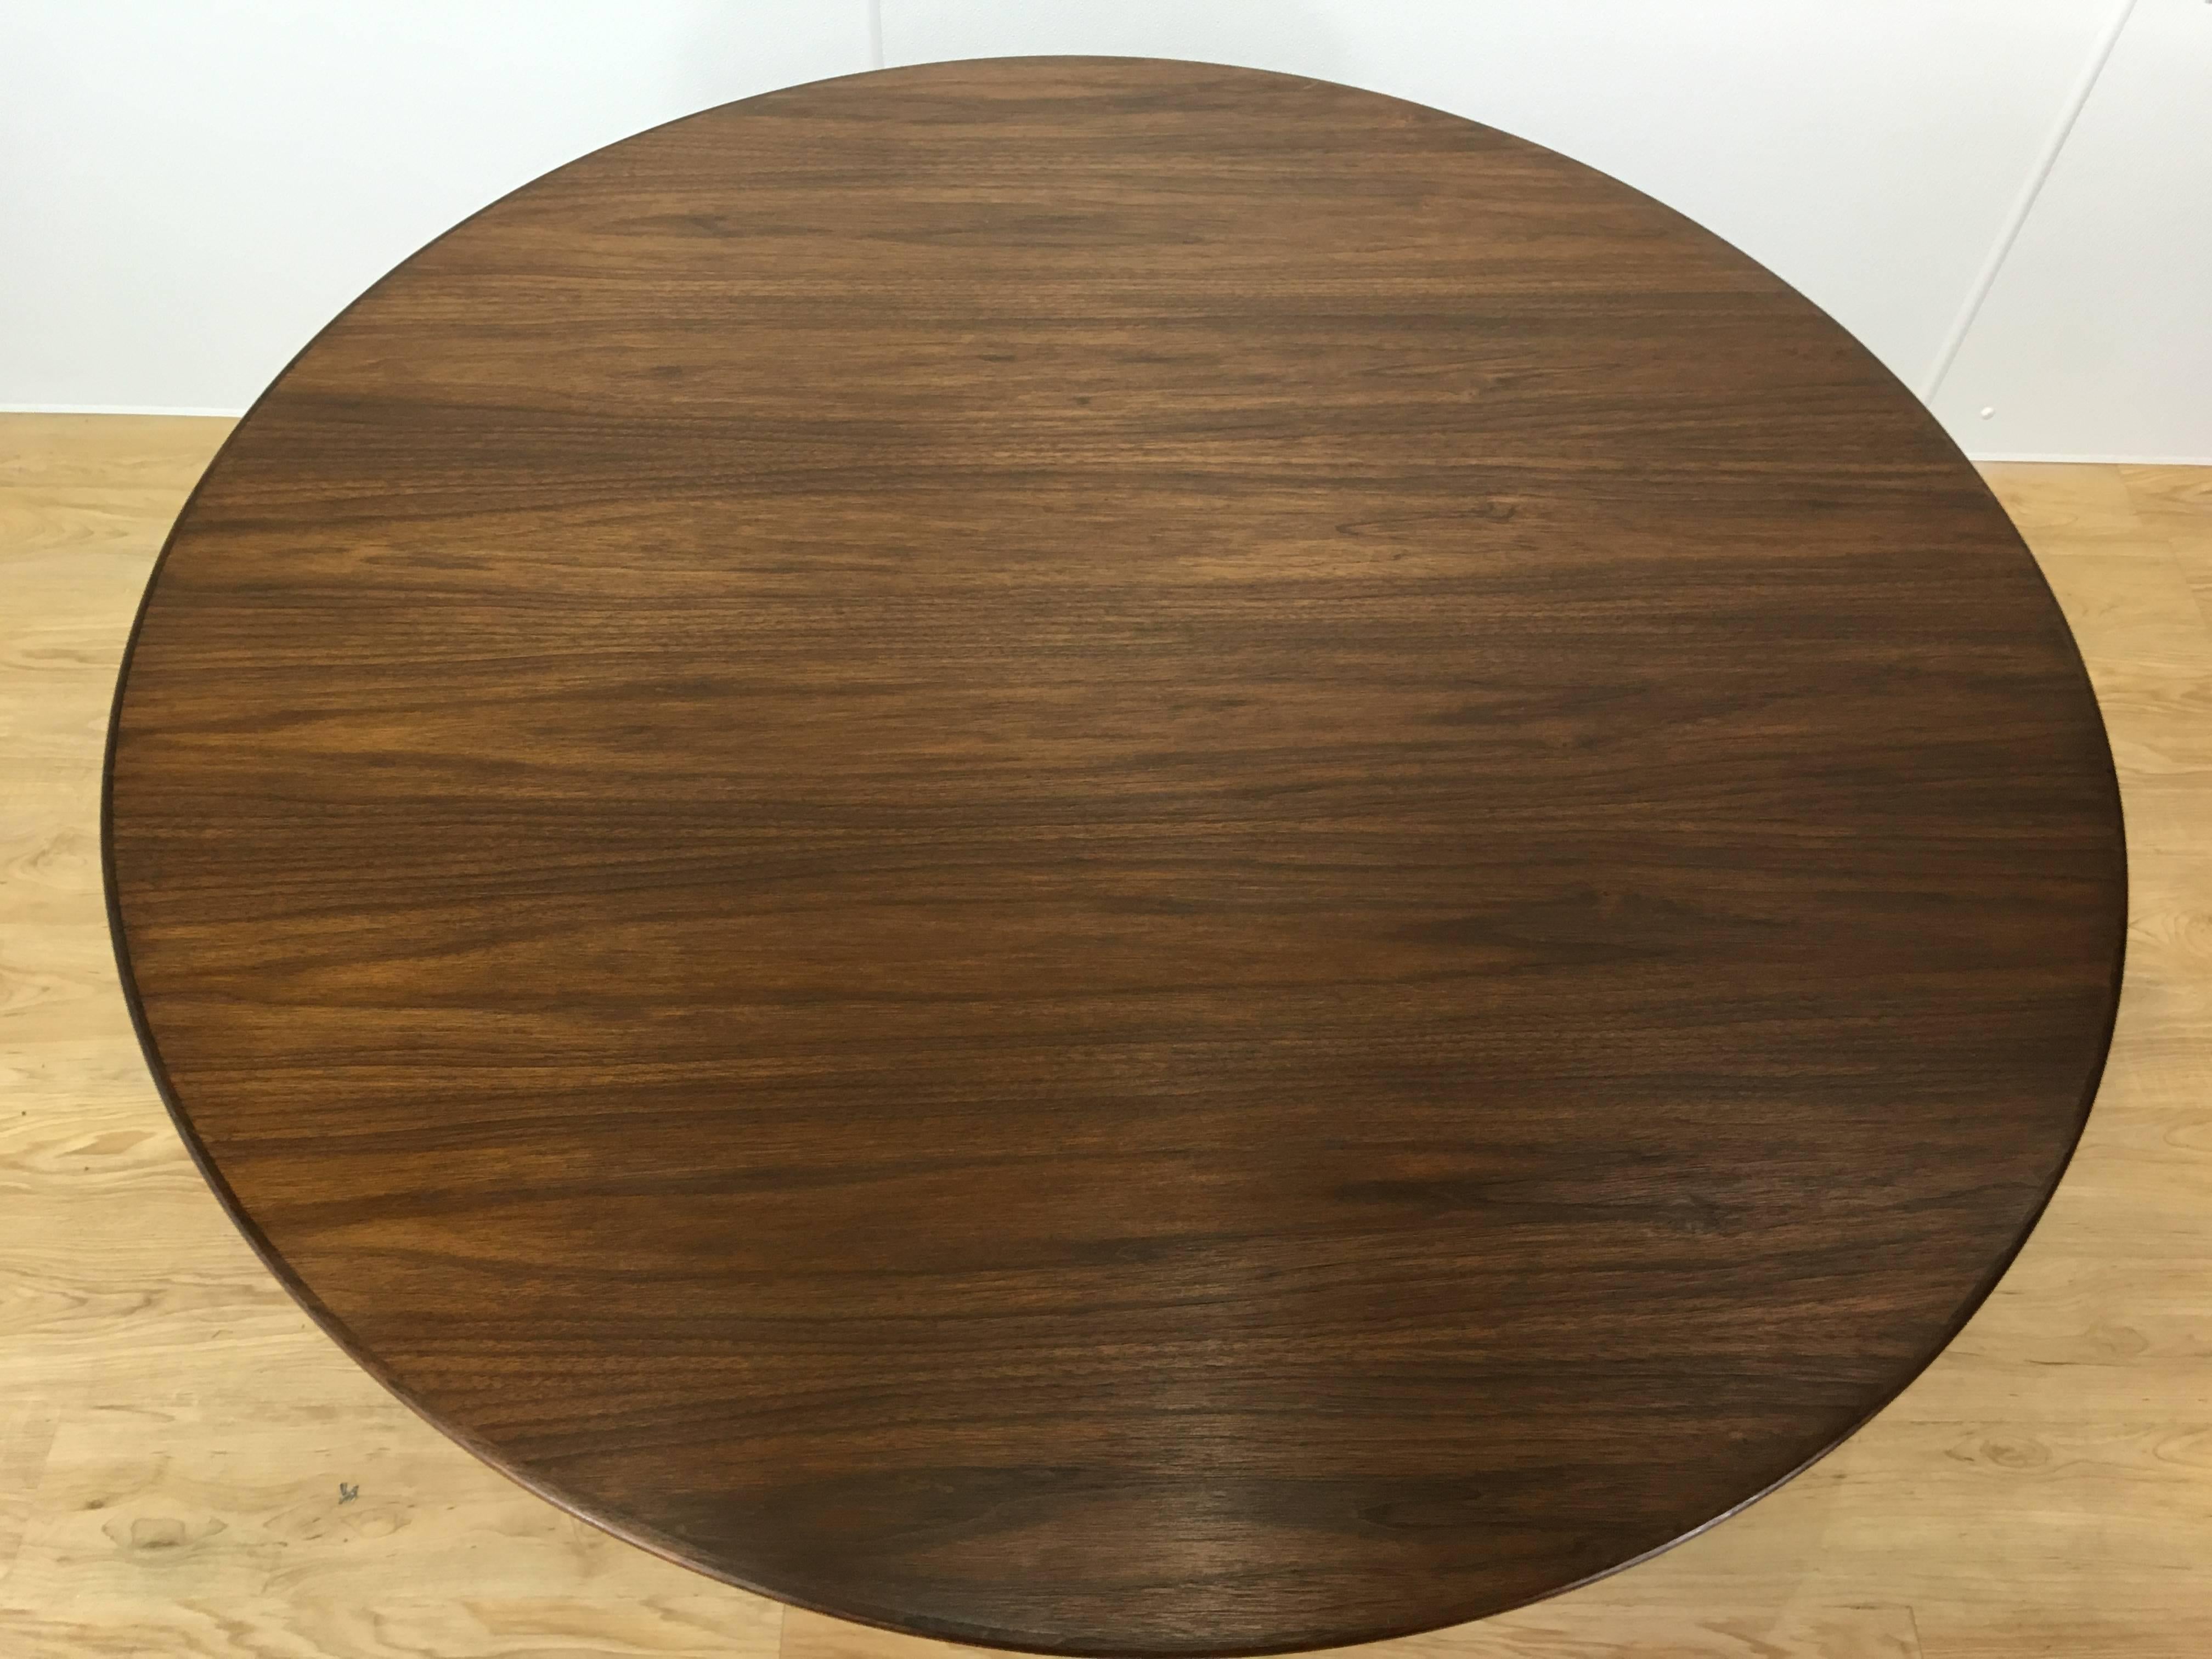 Eero Saarinen walnut dining table by Knoll, with 48 inch circular well figured rosewood top with beautiful inclined chamfered edge, raised on typical enameled aluminum weighted base.